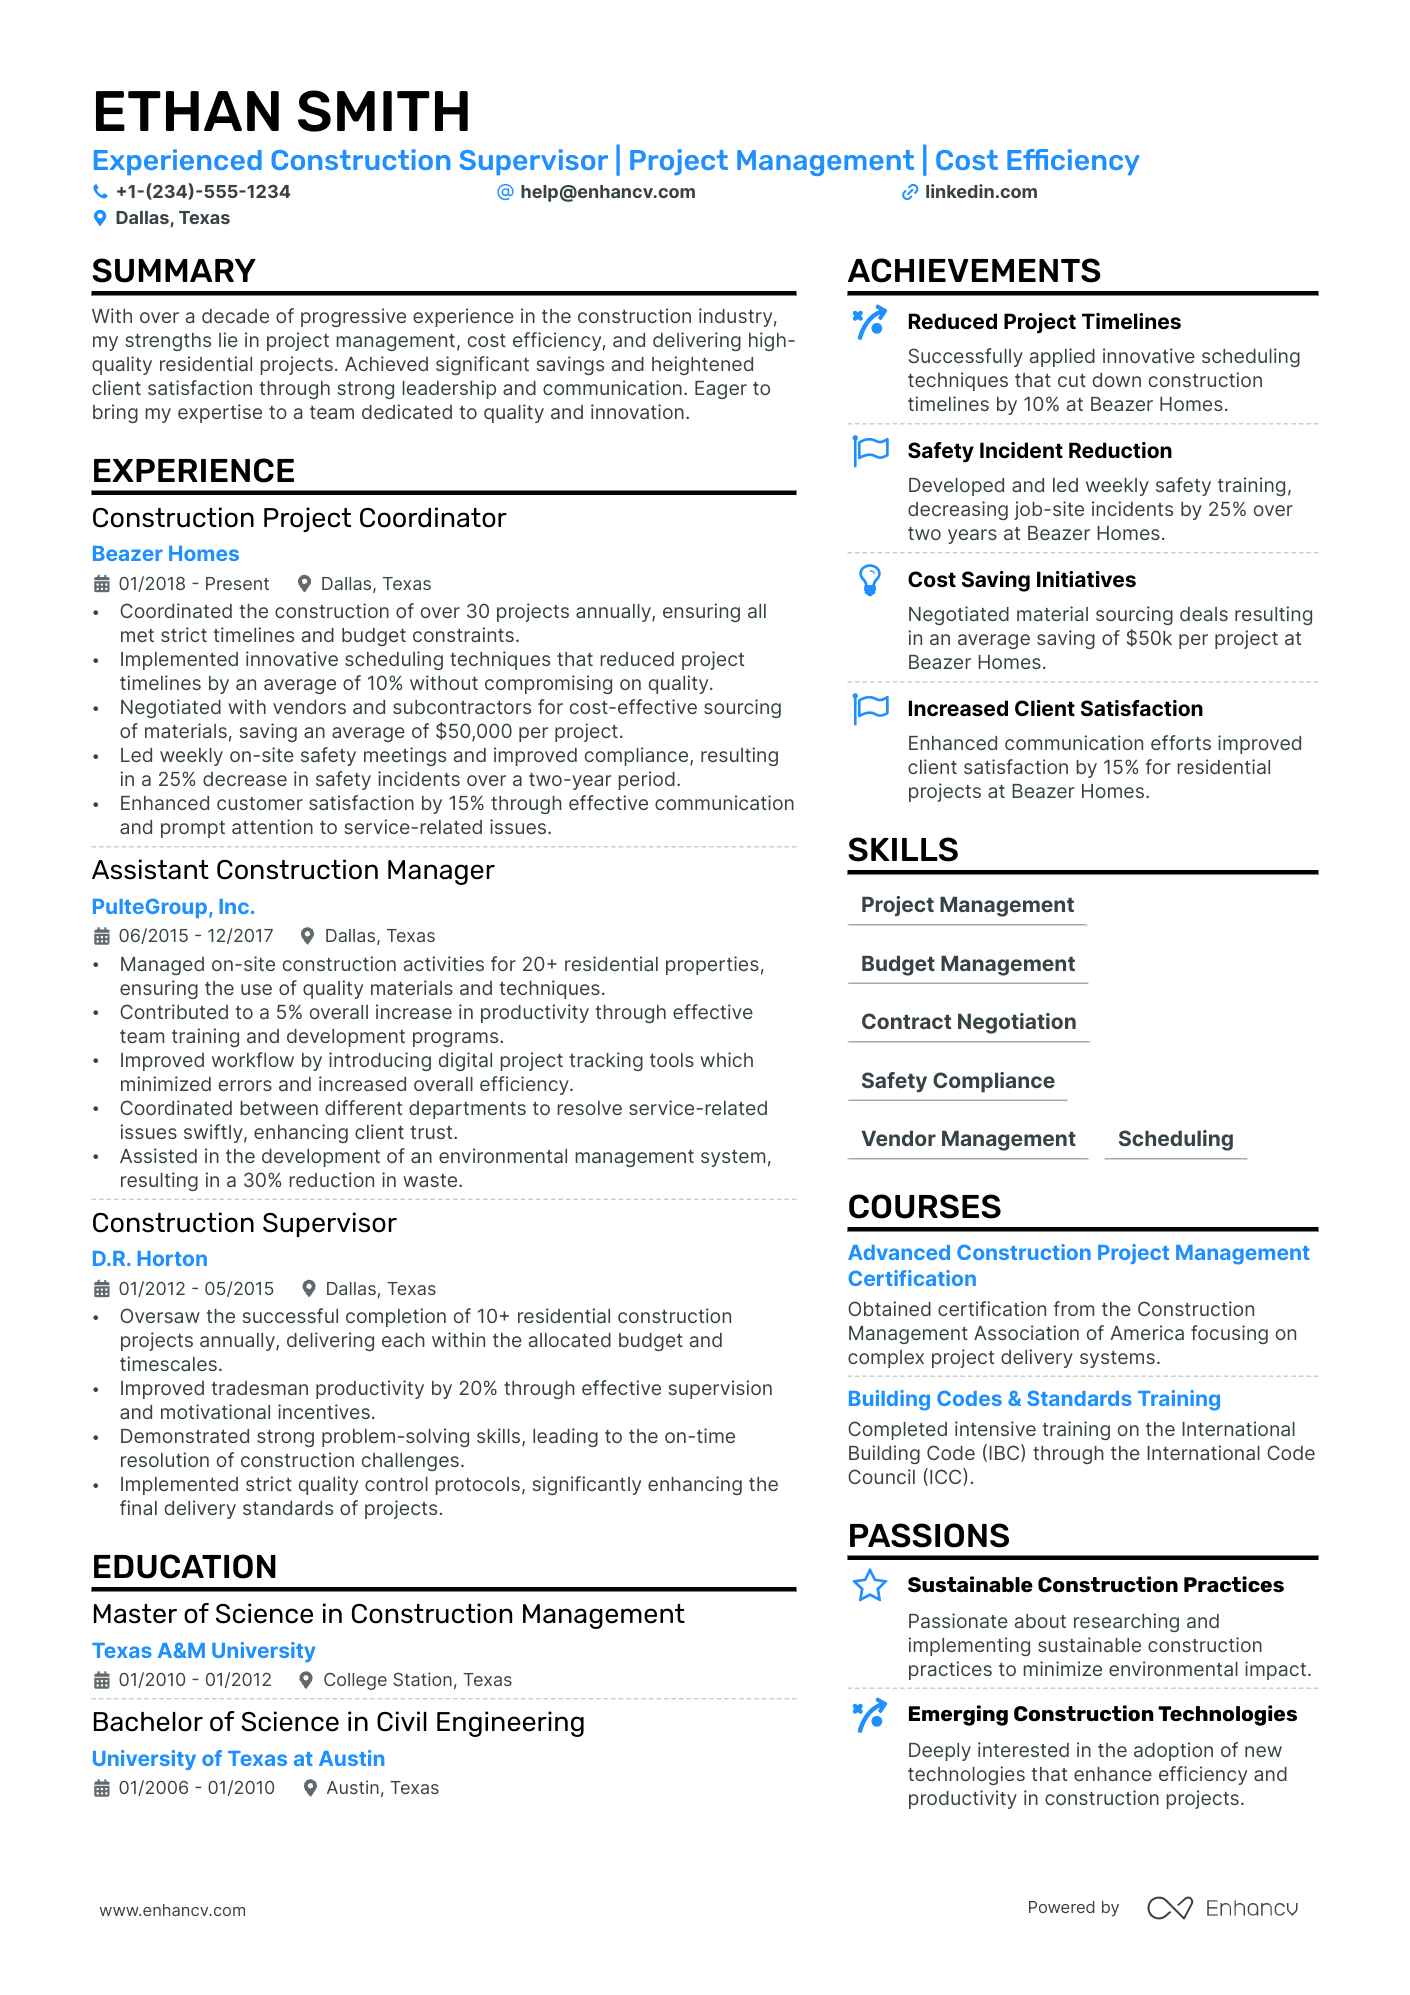 Construction Manager resume example